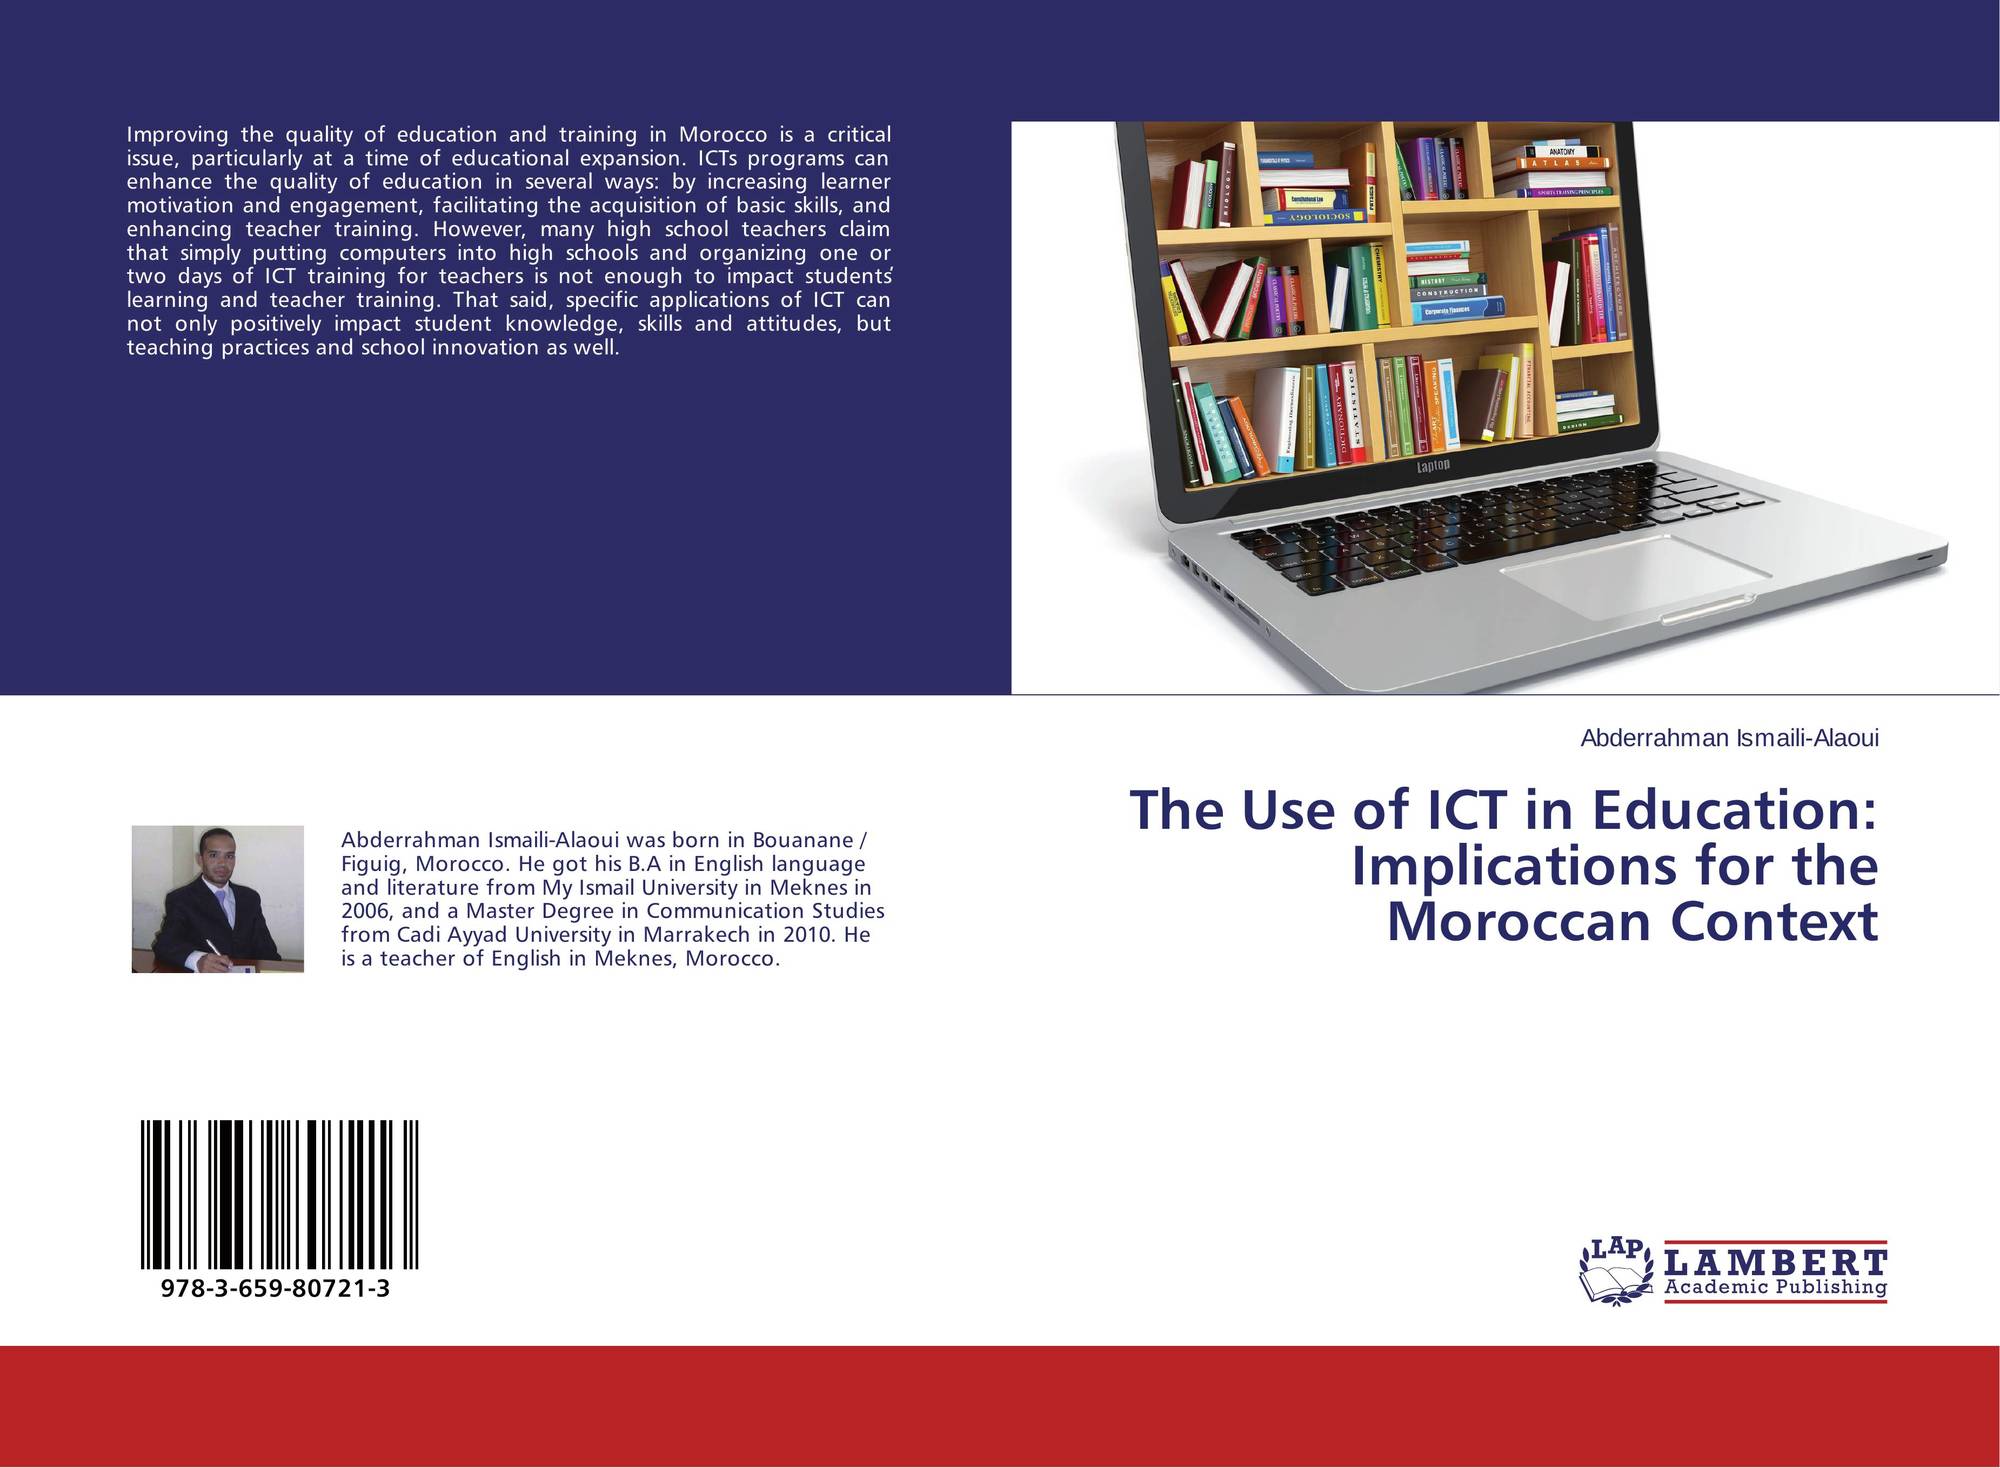 implication of ict in education